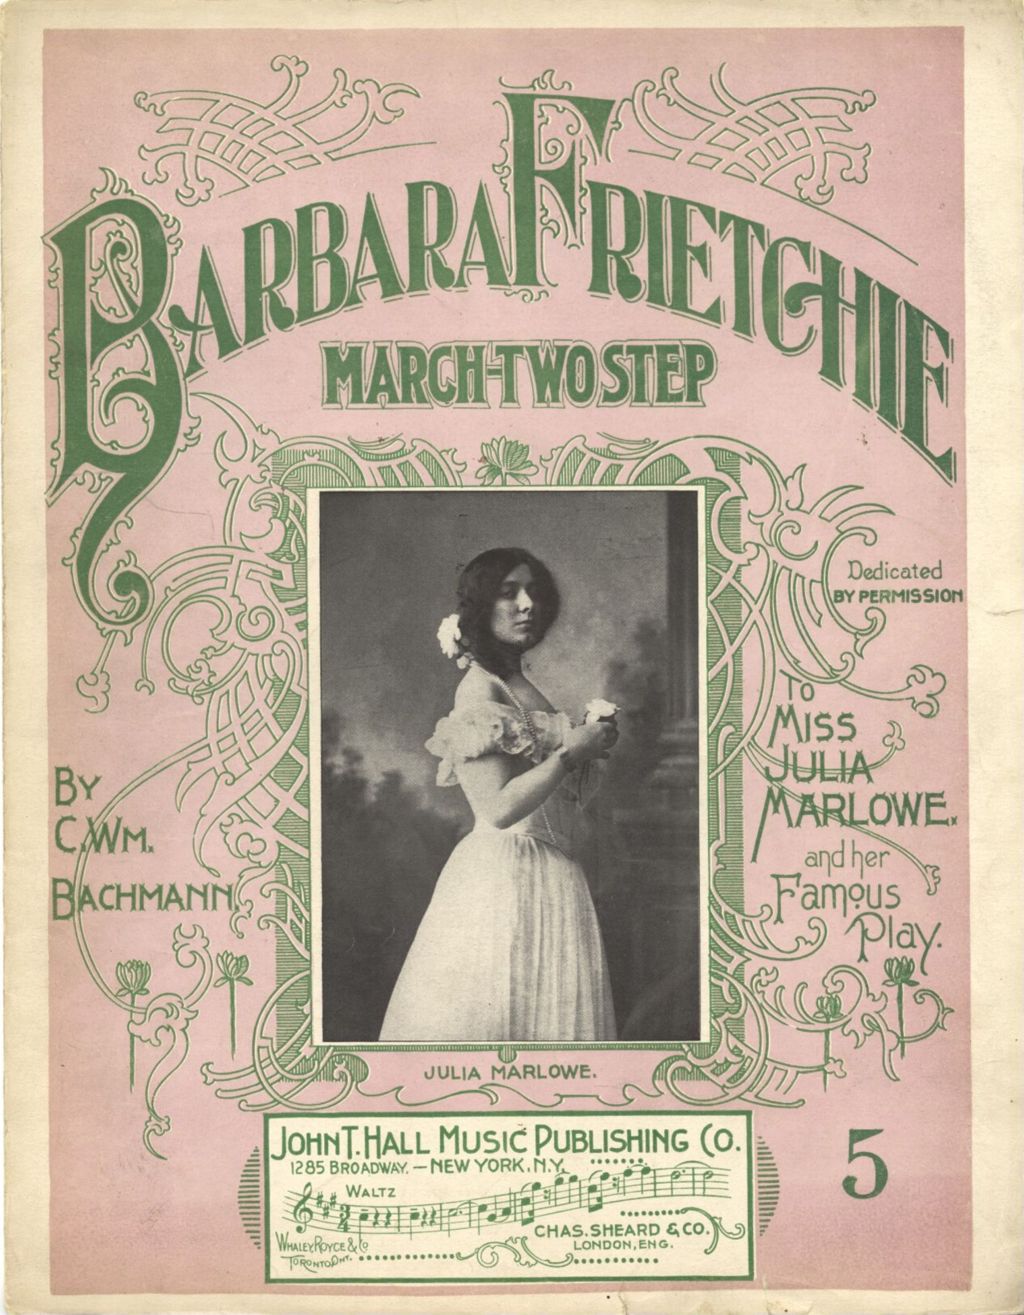 Miniature of Barbara Frietchie (March and Two Step)